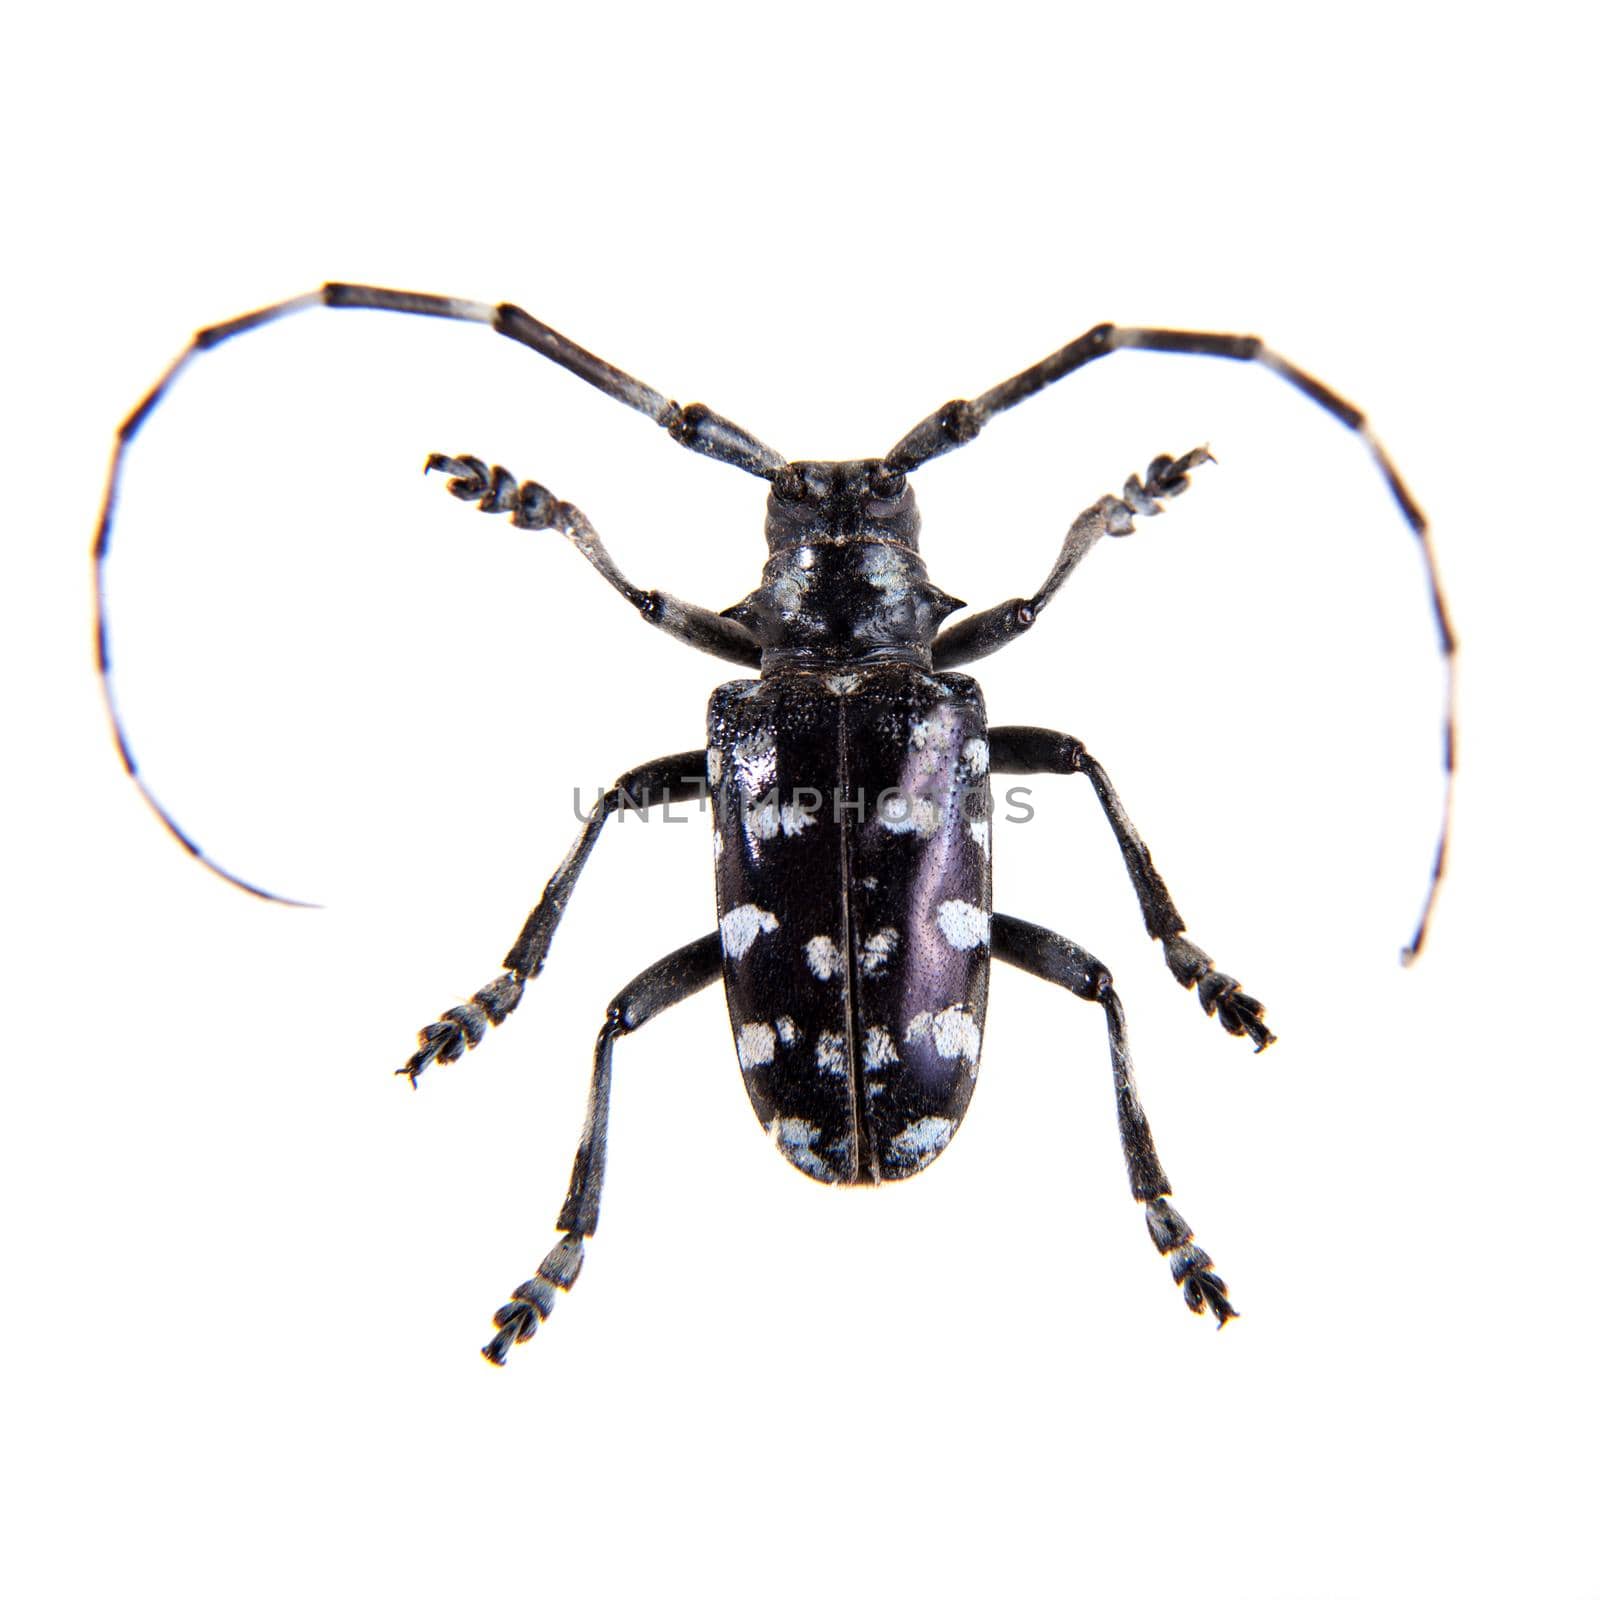 The Pine sawyer beetle on the white background by RosaJay